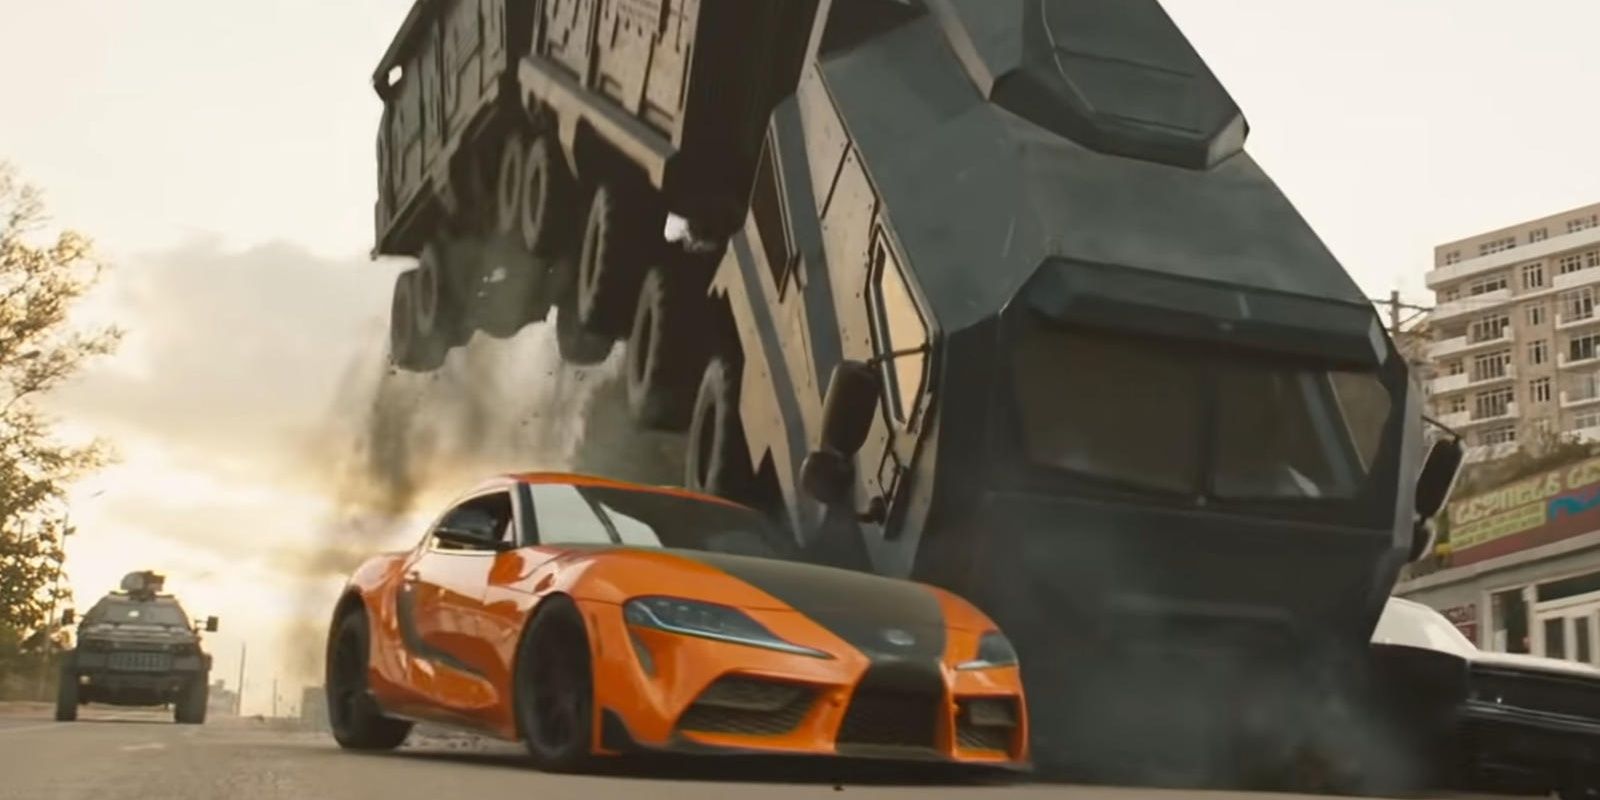 Dom uses the 2020 Toyota Supra to flip over Otto's 16-wheeler in F9